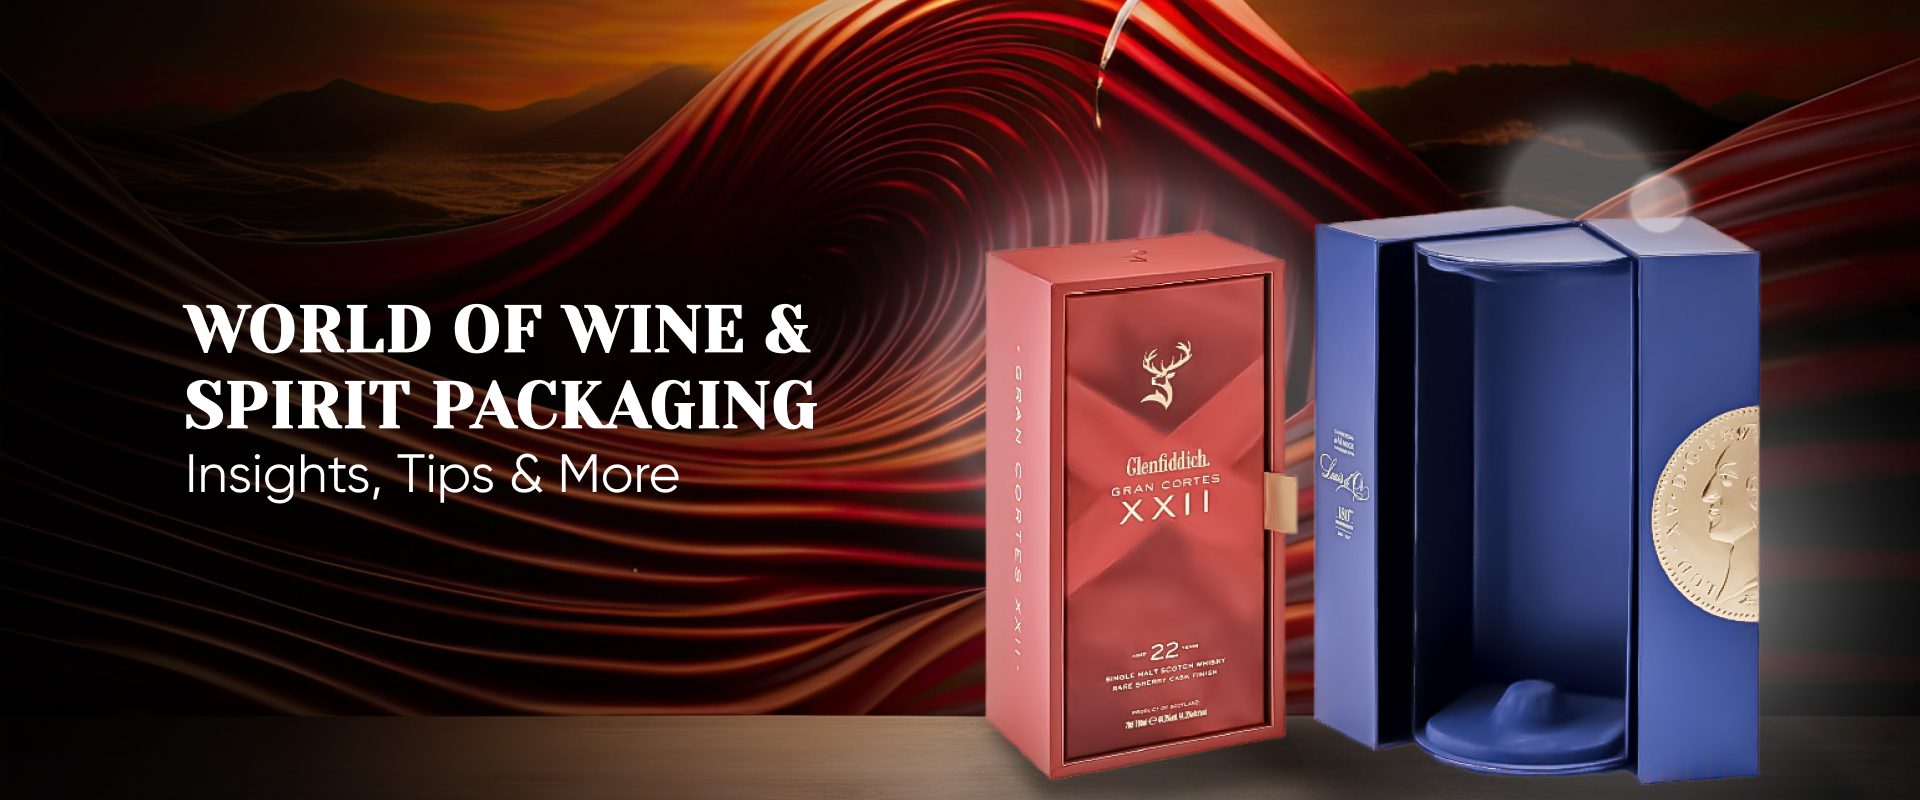 World of Wine & Spirit Packaging Solutions: Insights, Tips & More